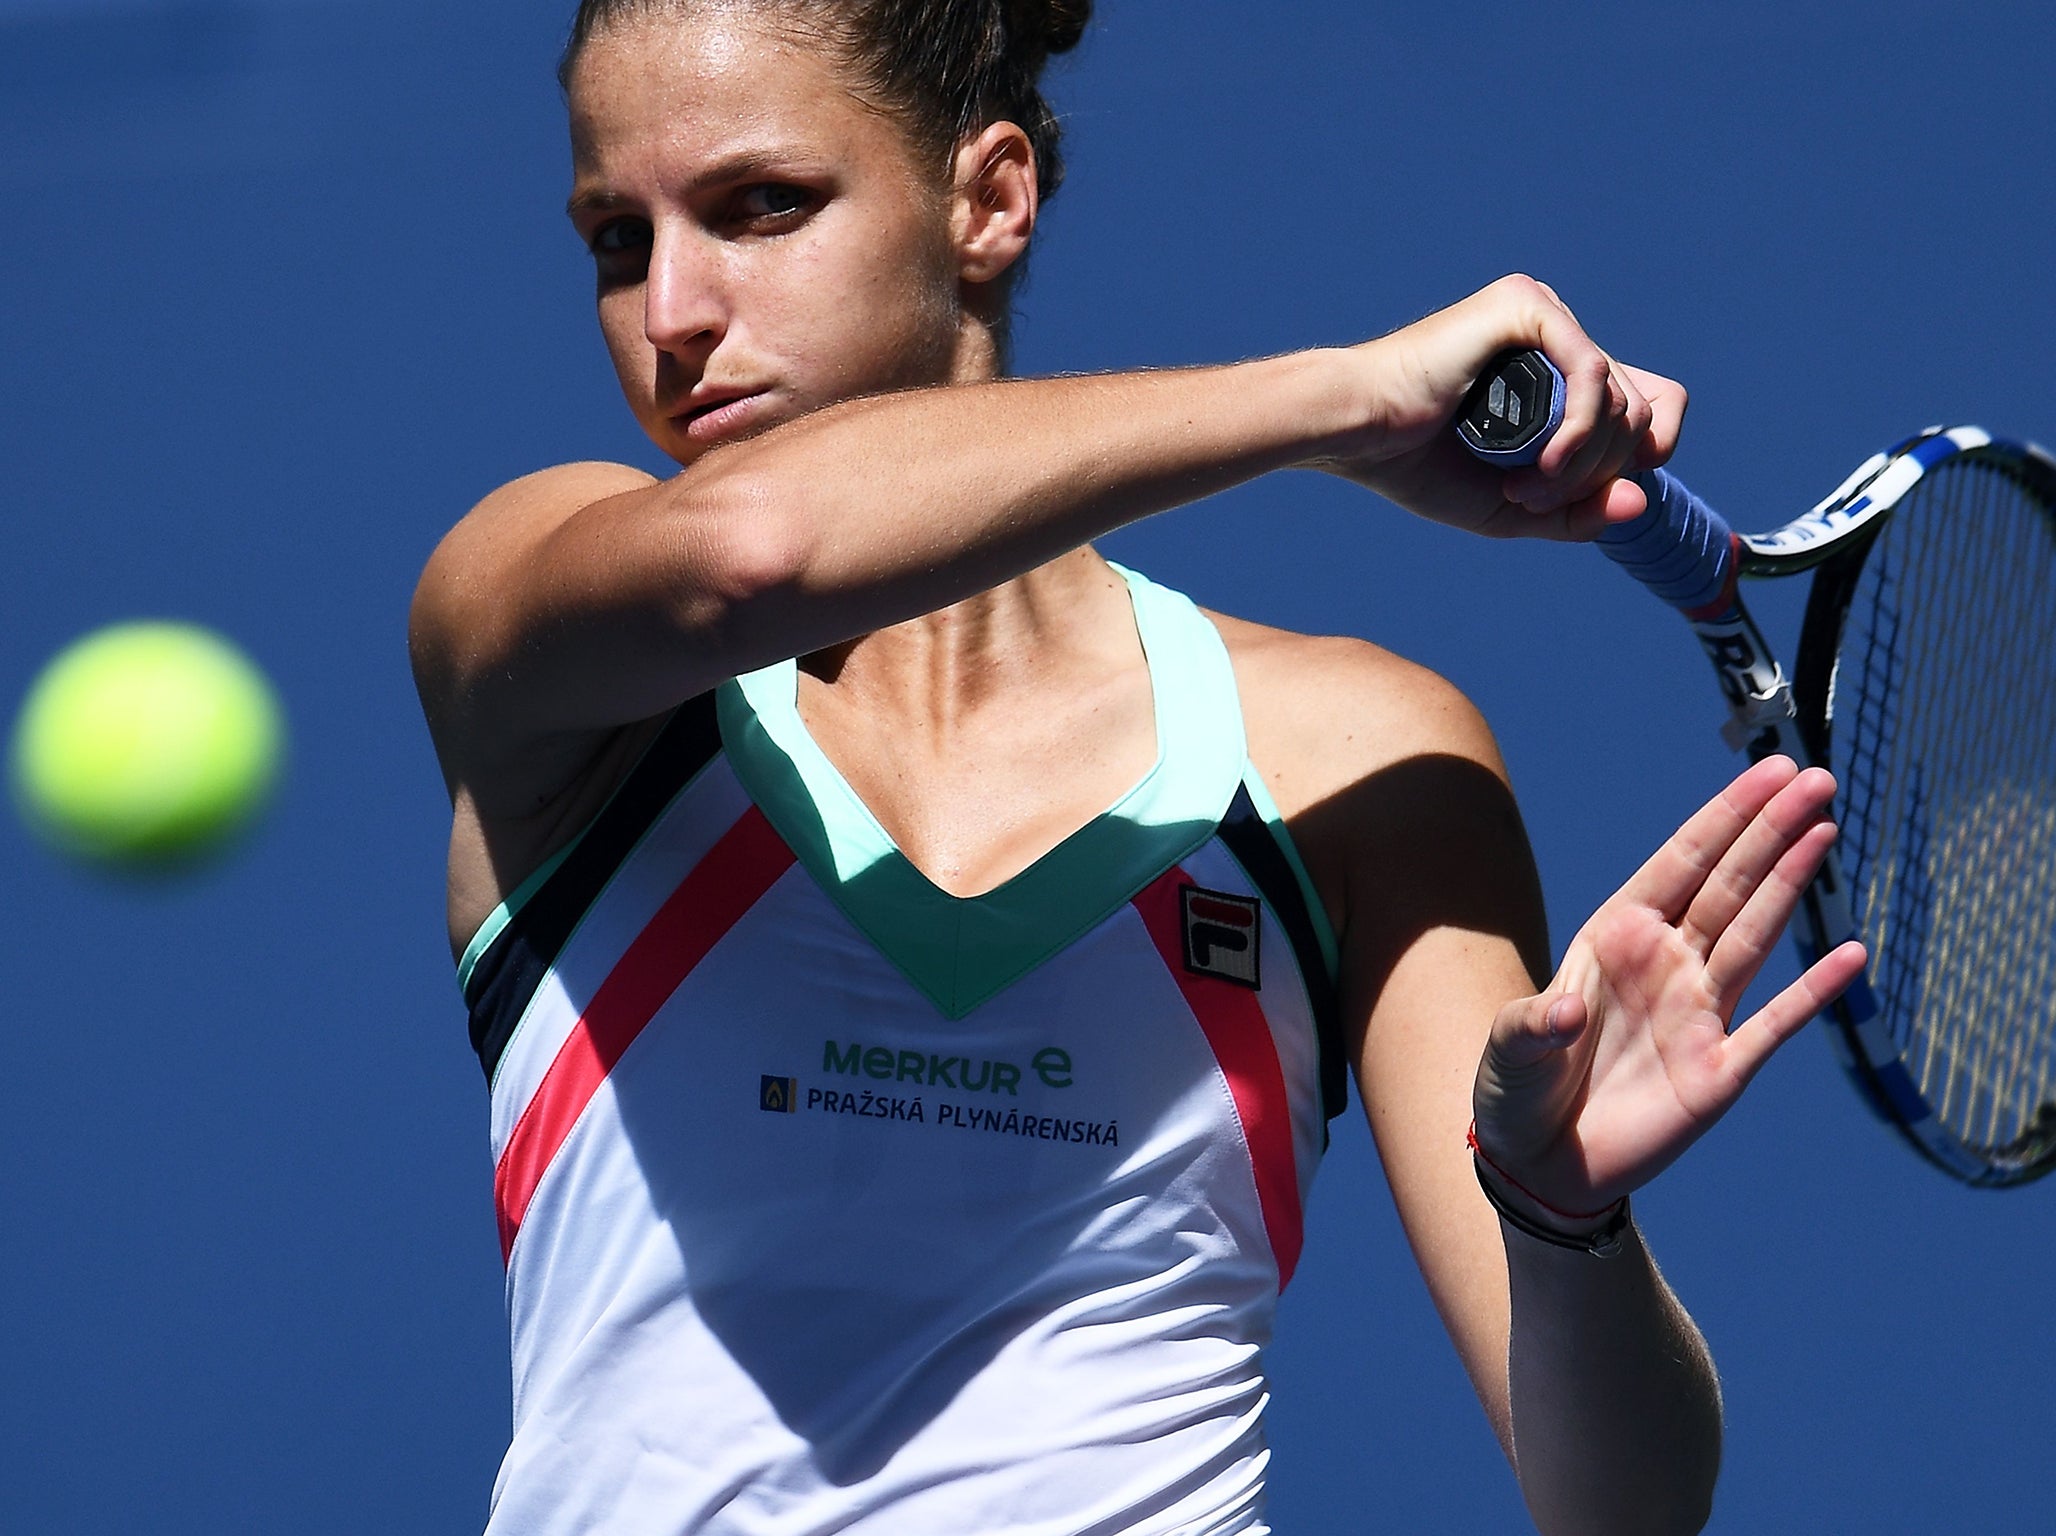 Pliskova is among the favourites to win this year's US Open